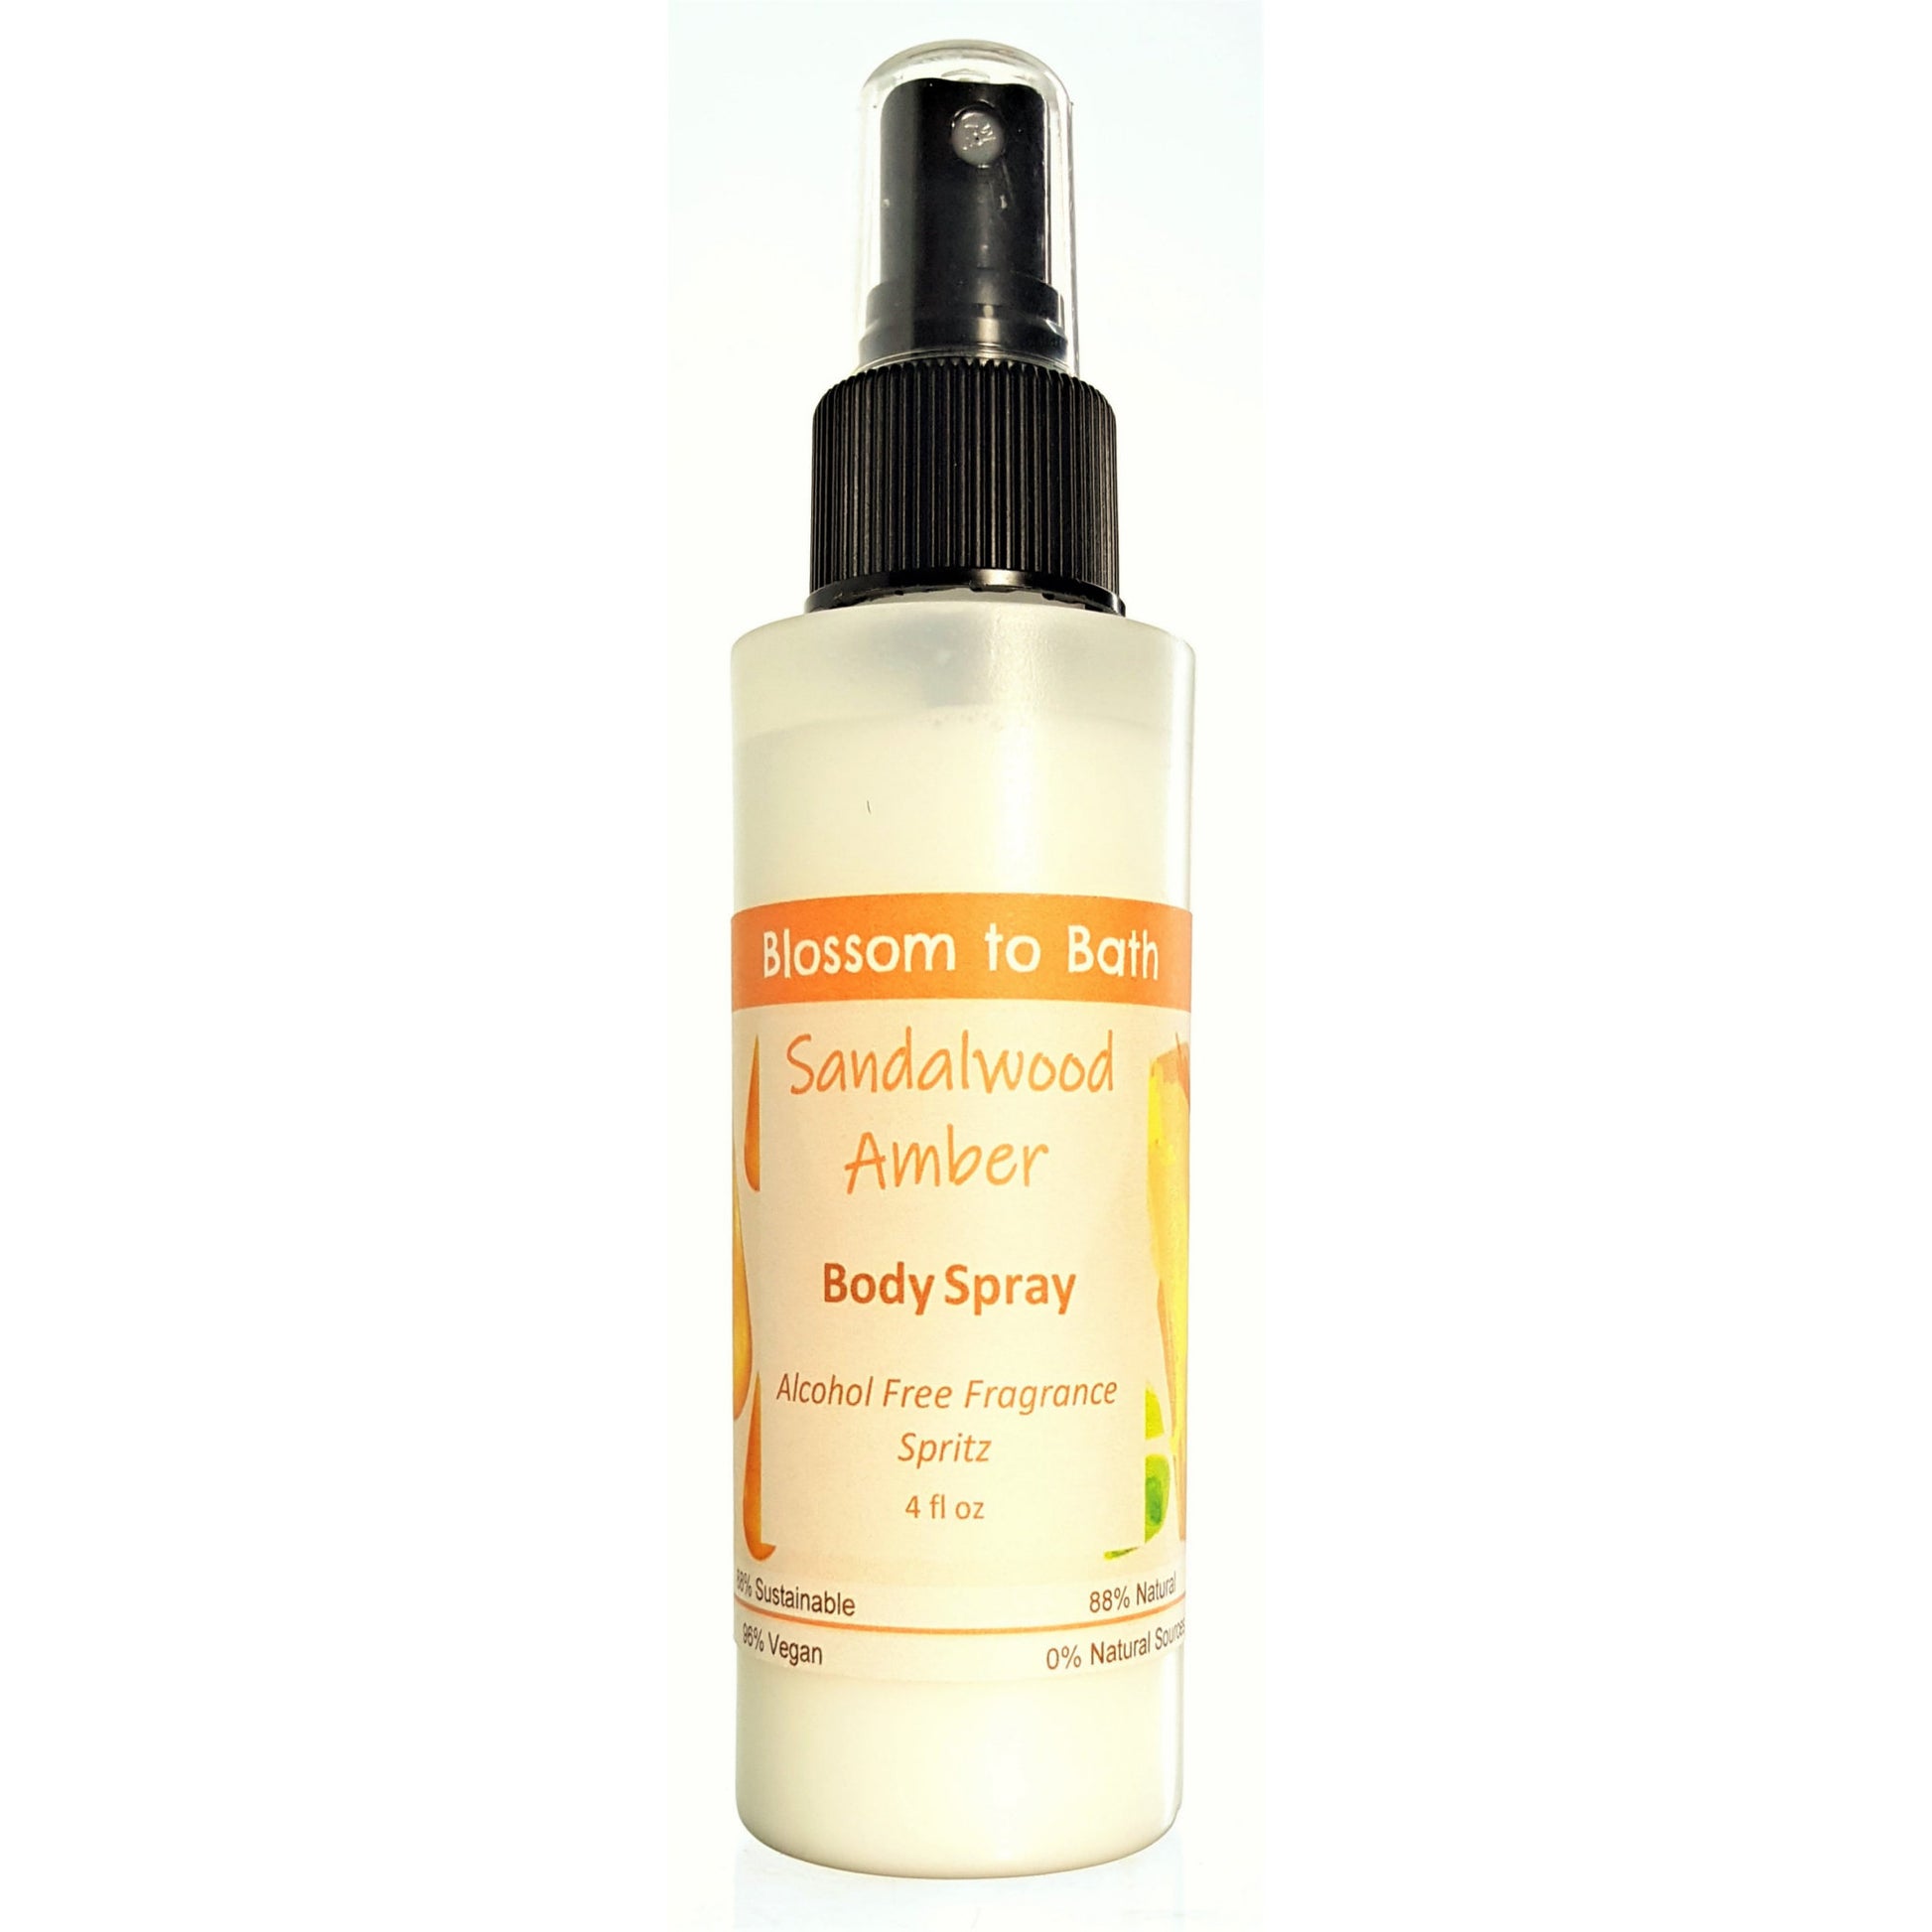 Buy Blossom to Bath Sandalwood Amber Body Spray from Flowersong Soap Studio.  Natural  freshening of skin, linens, or air  An irresistible combination of warm sandalwood and spice.